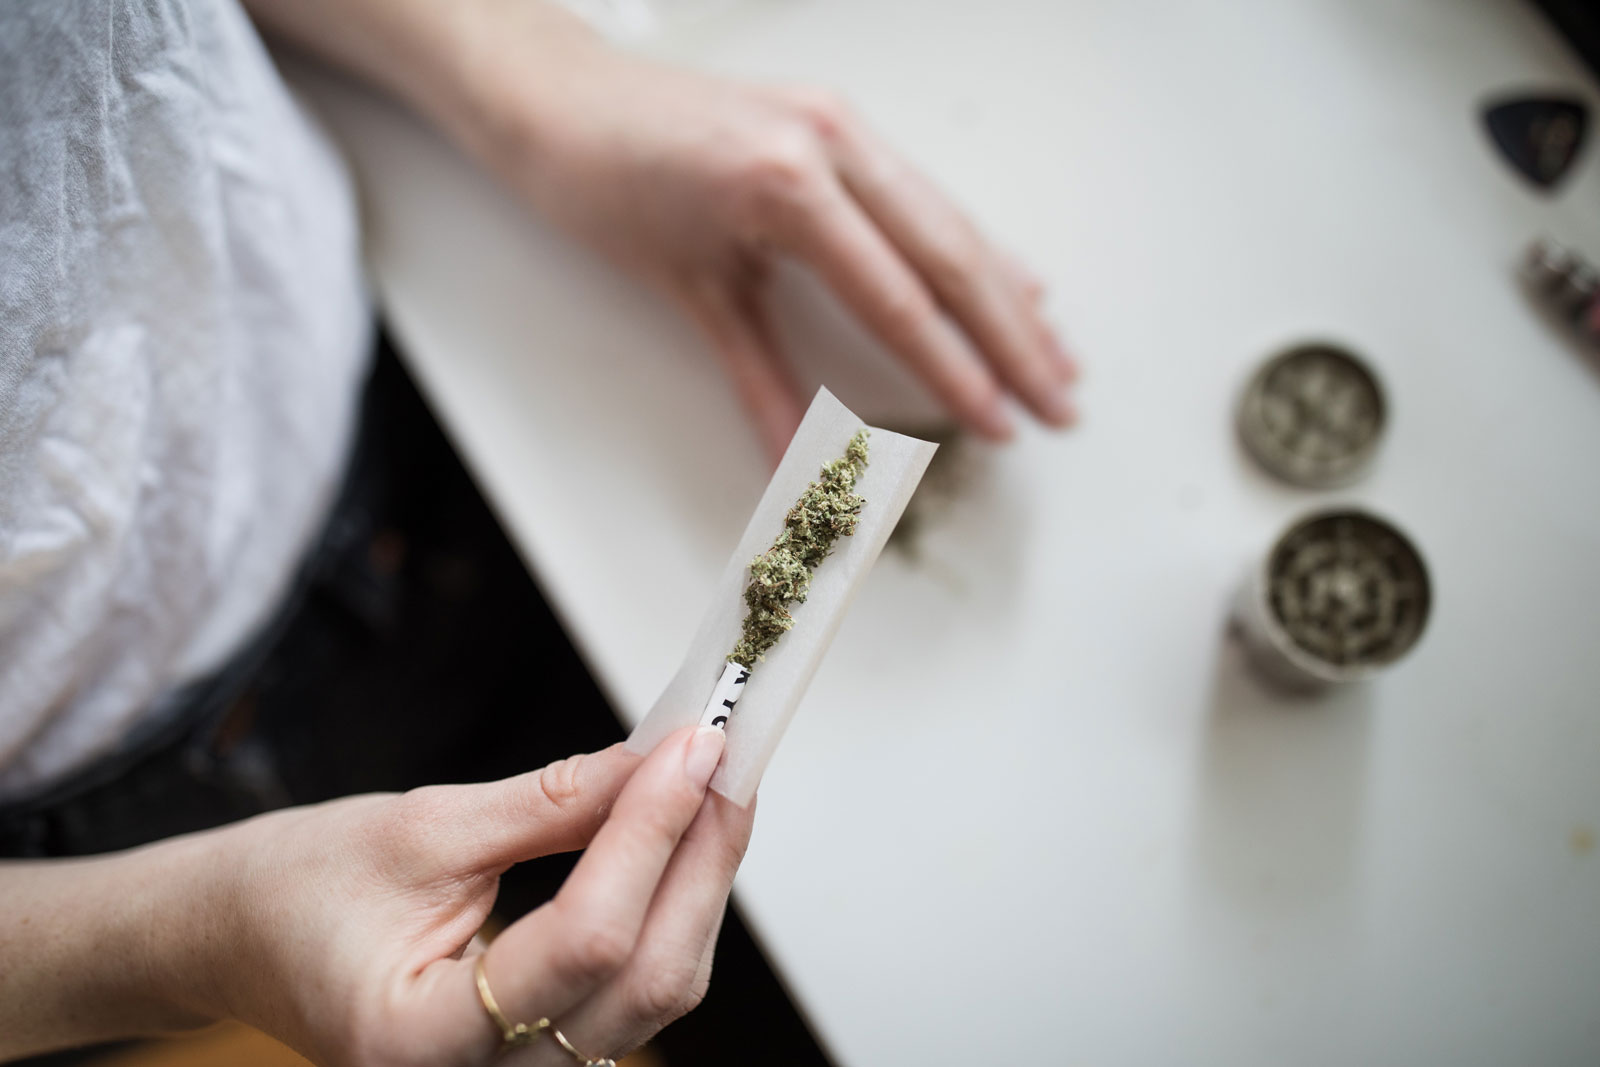 Woman rolling cannabis with rolling paper